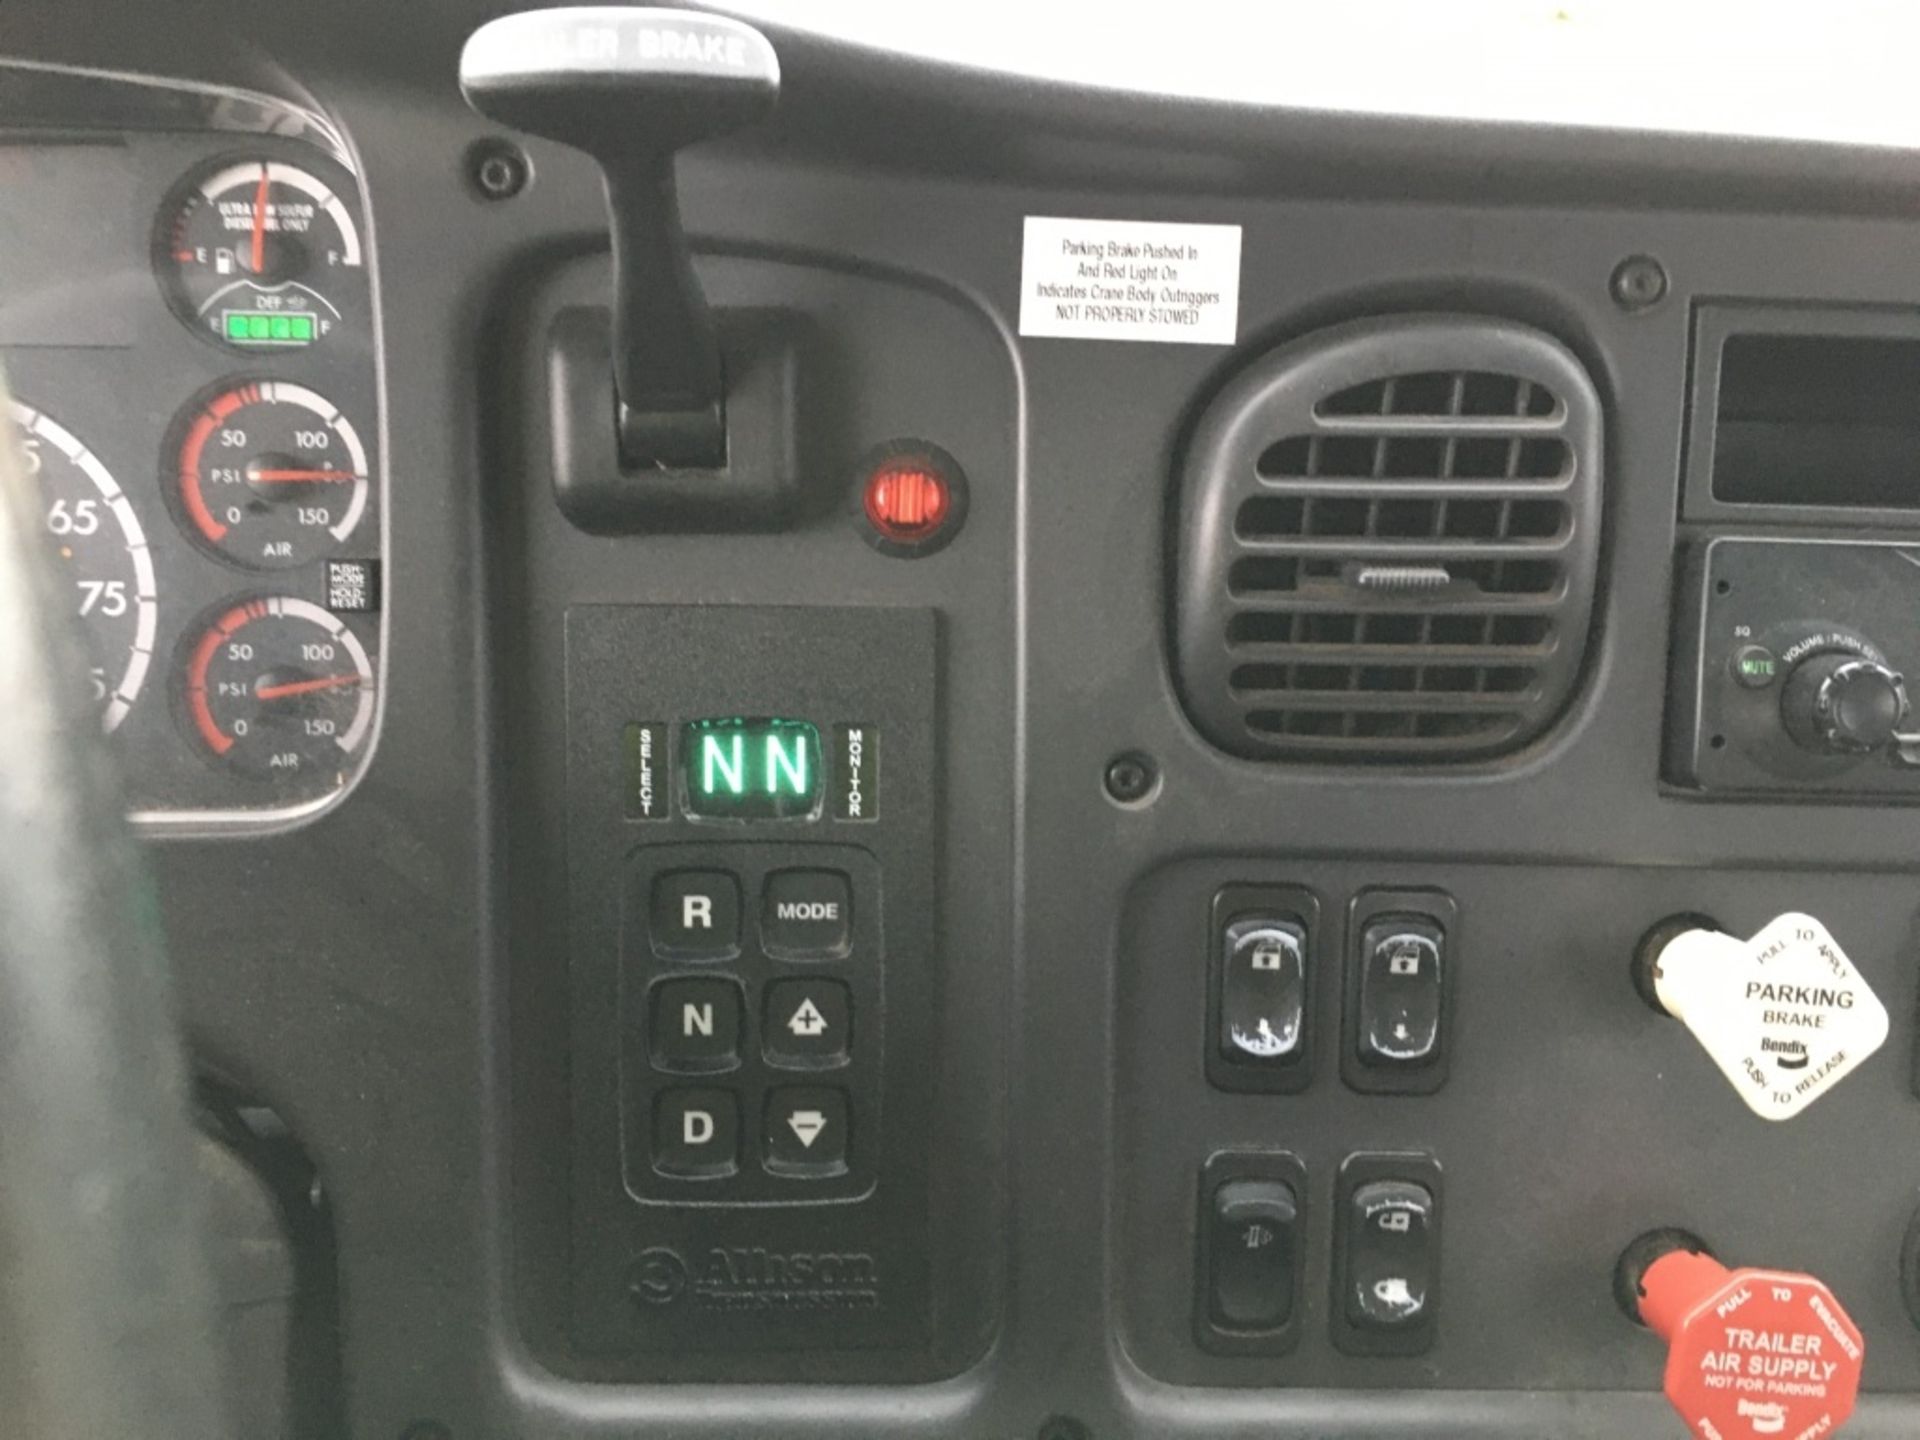 2011 Freightliner M2 Business Class Service Truck - Image 41 of 47